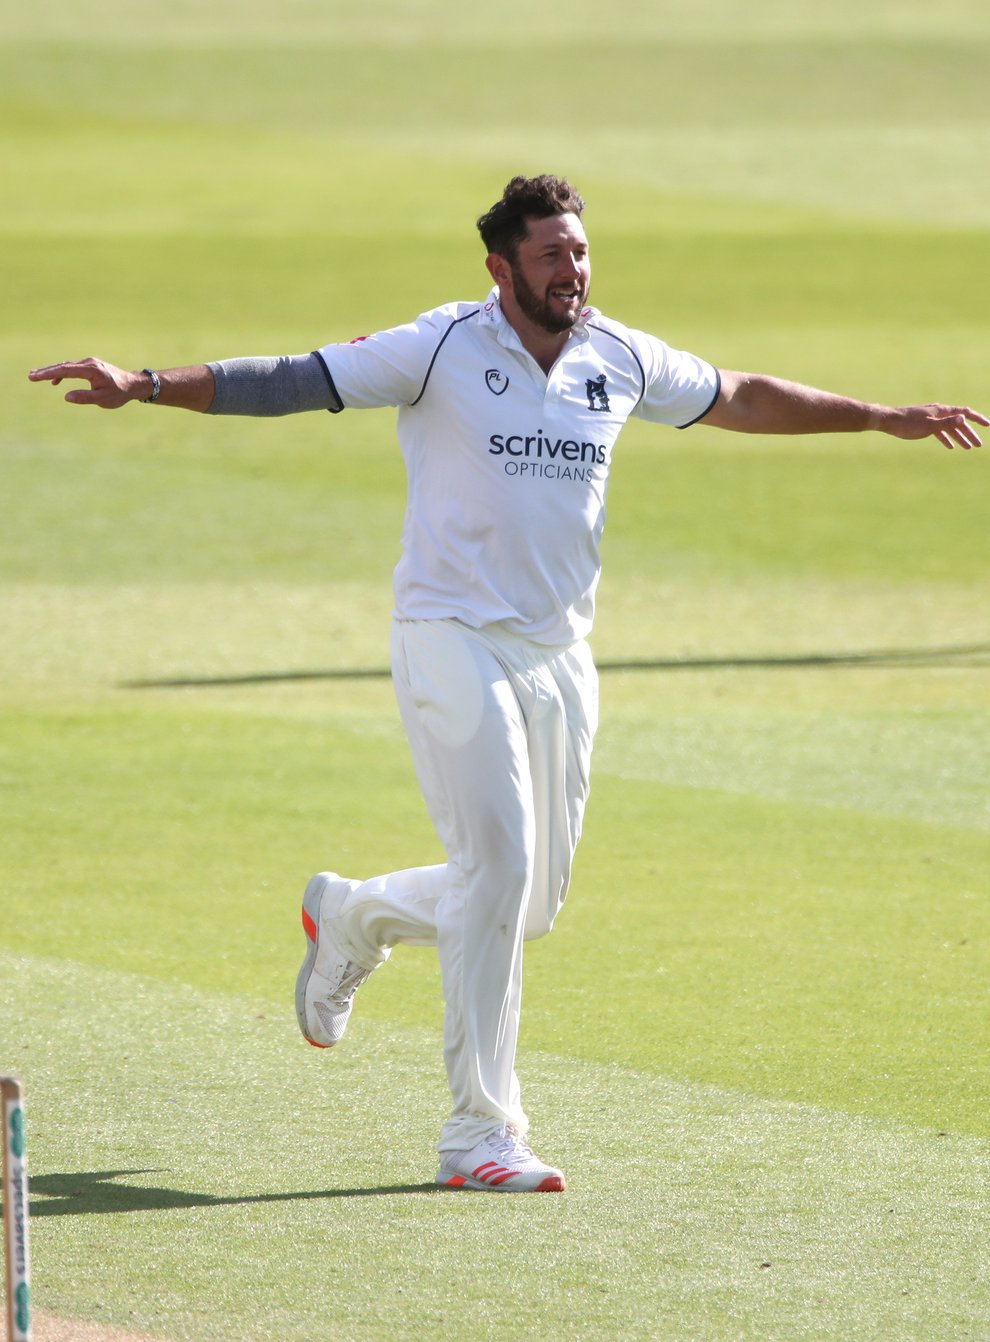 Tim Bresnan finished with six catches in the innings at first slip in Warwickshire’s win at Yorkshire (Nick Potts/PA)